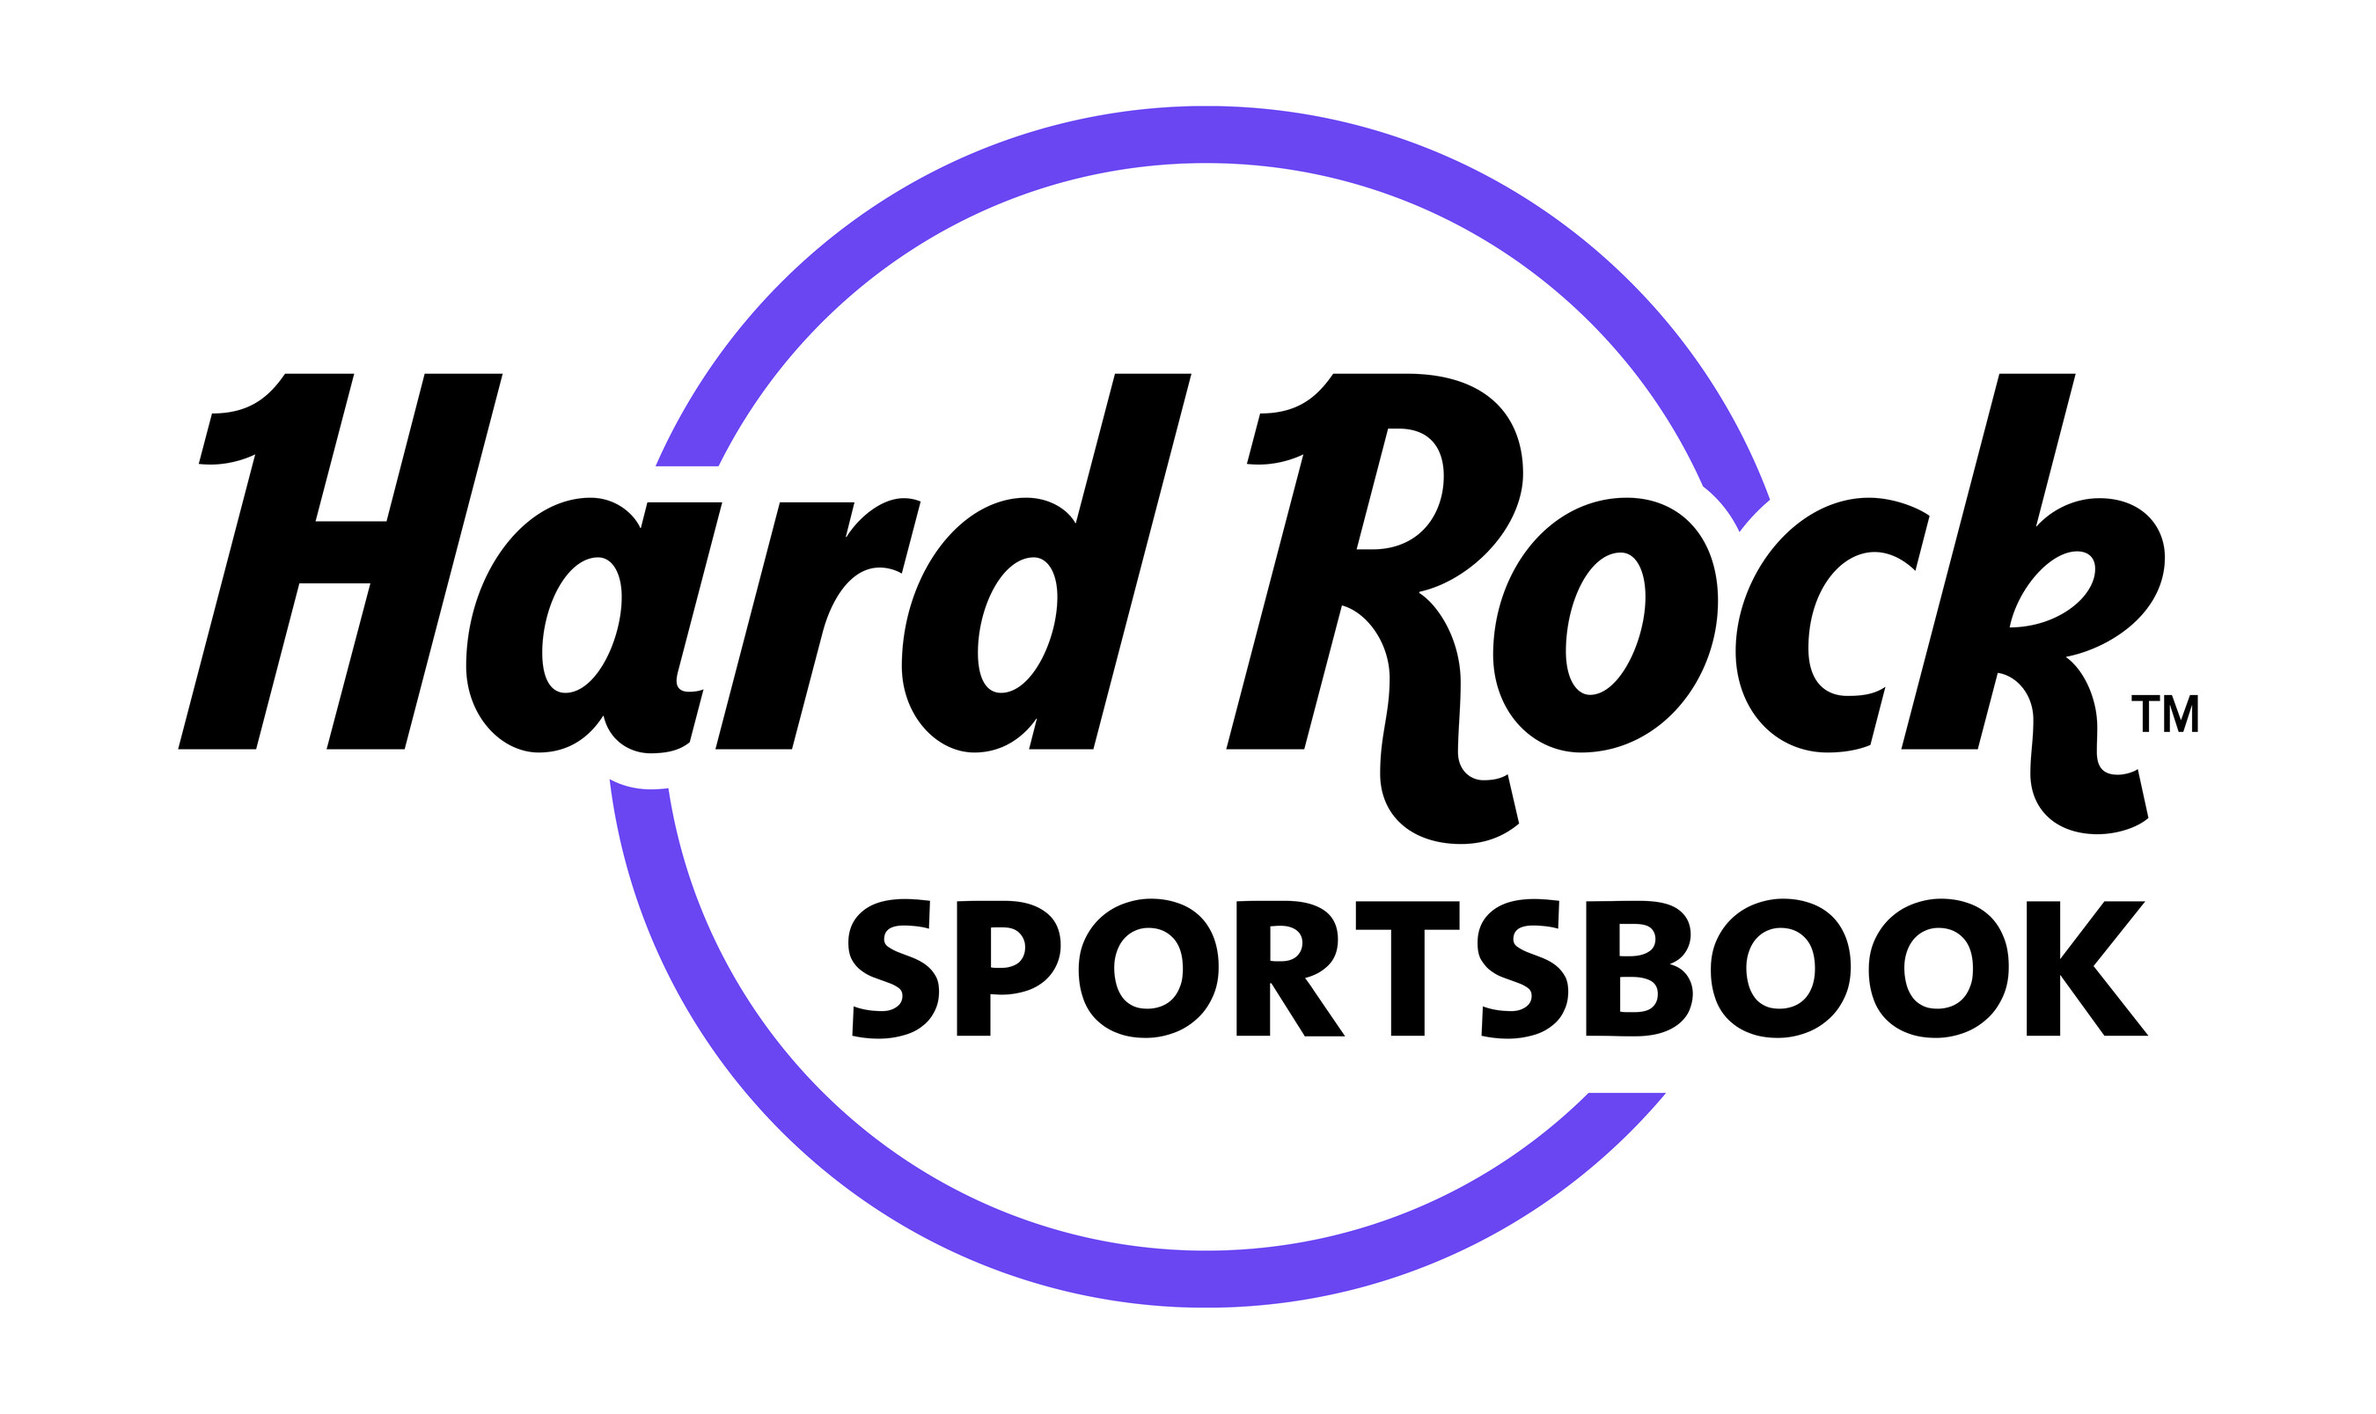 Nuvei provides payment services for Hard Rock Sportsbook app